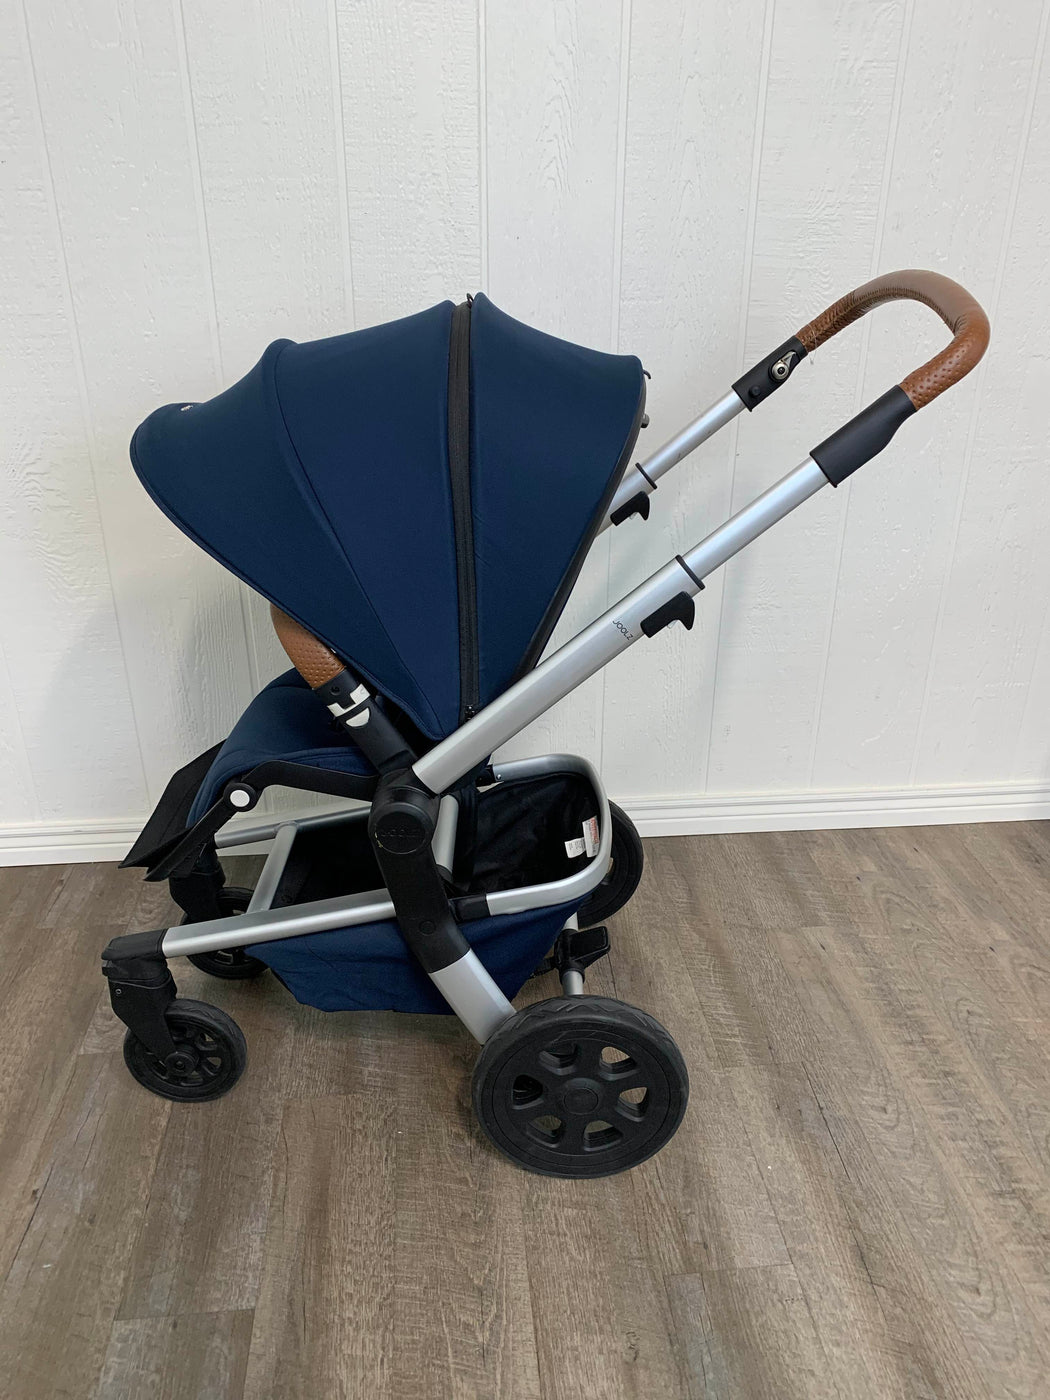 used graco double stroller